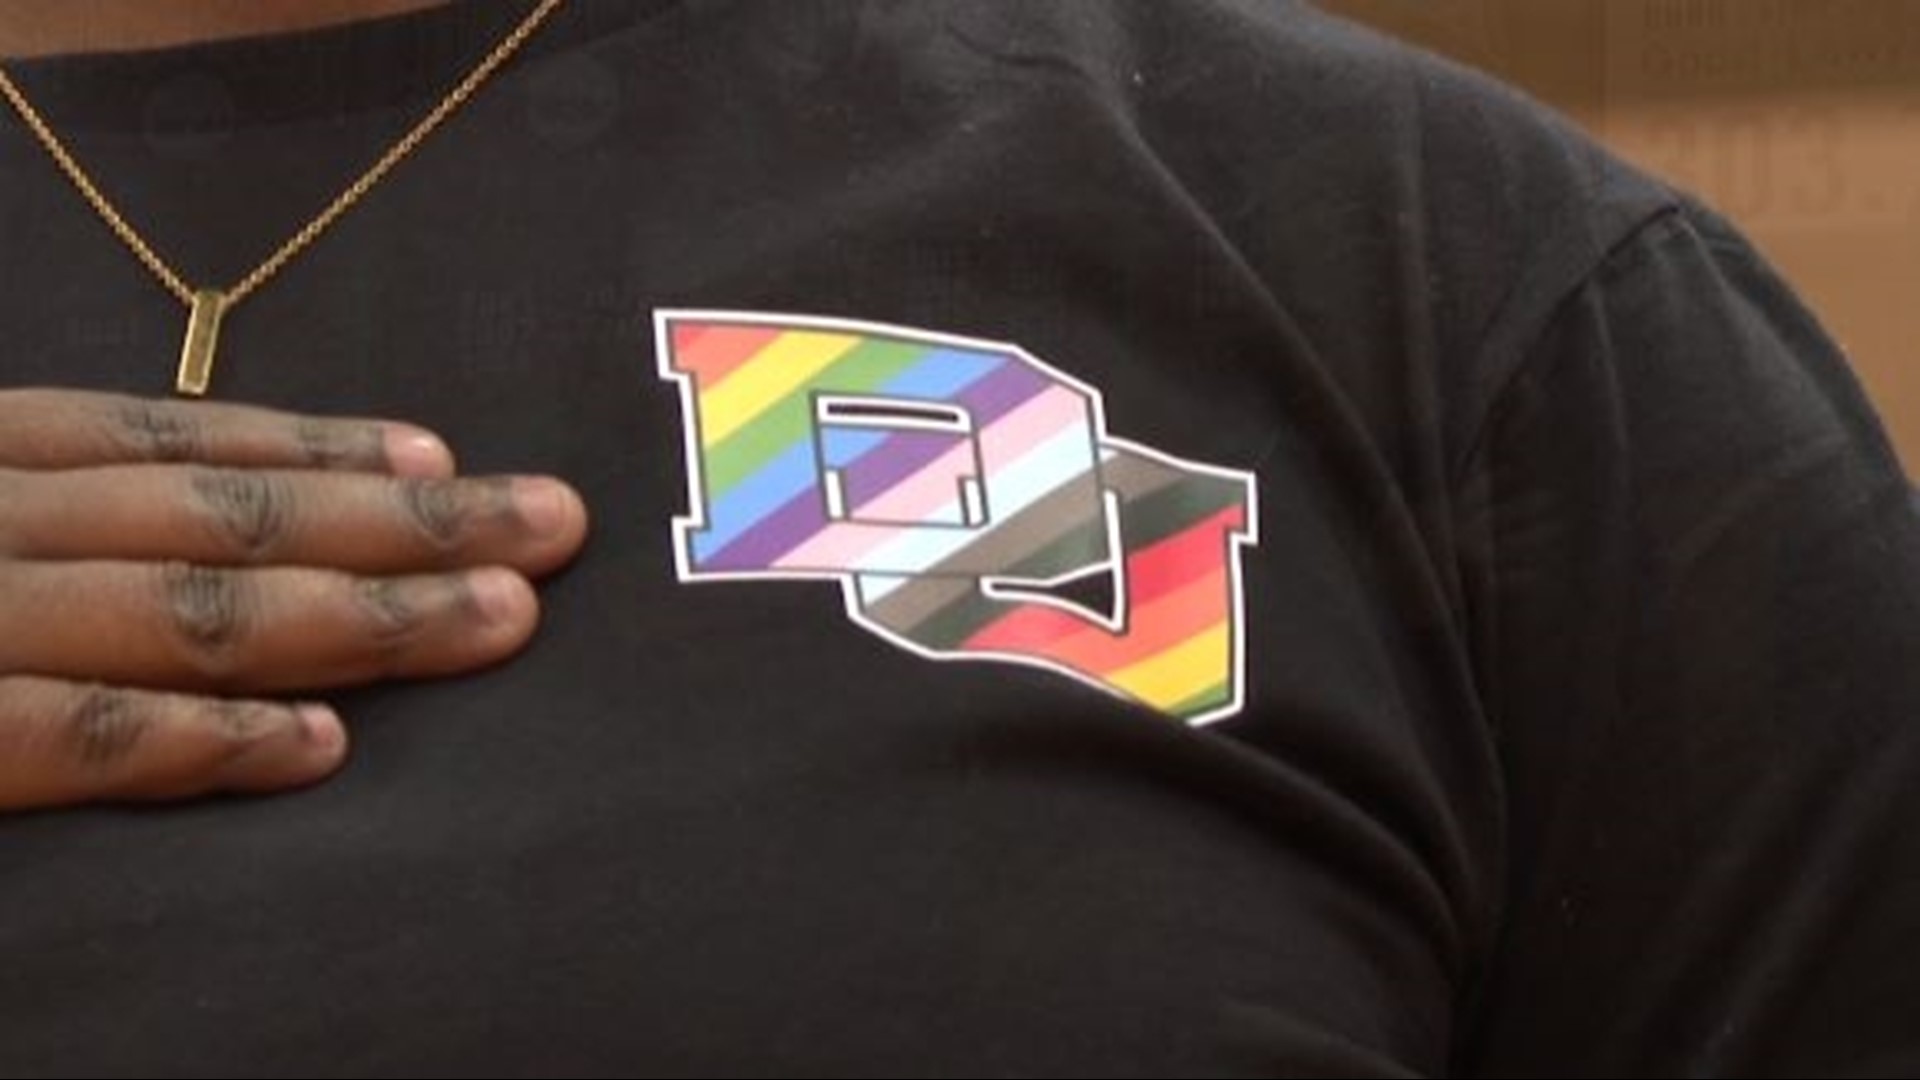 Doshia Woods and the Denver women's basketball team hosted the first Pride Game to celebrate the LGBTQ community.